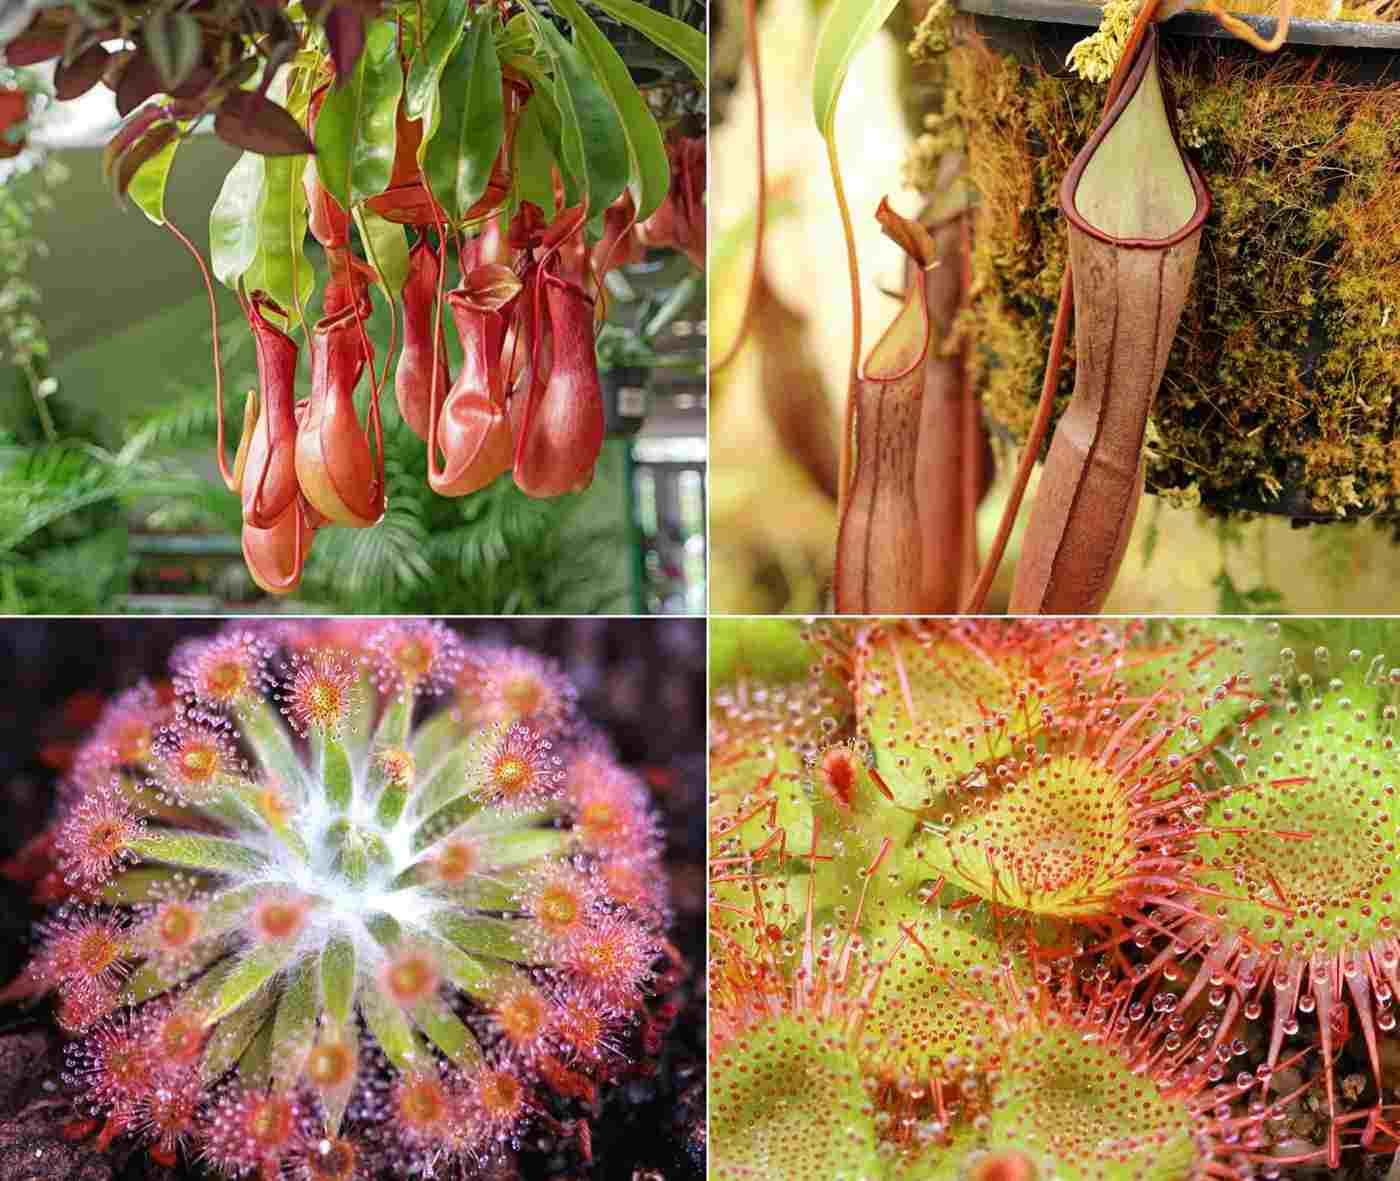 Can plants (Nepenthes) and Sun Rope (Drosera) as carnivorous plants for indoors and outdoors